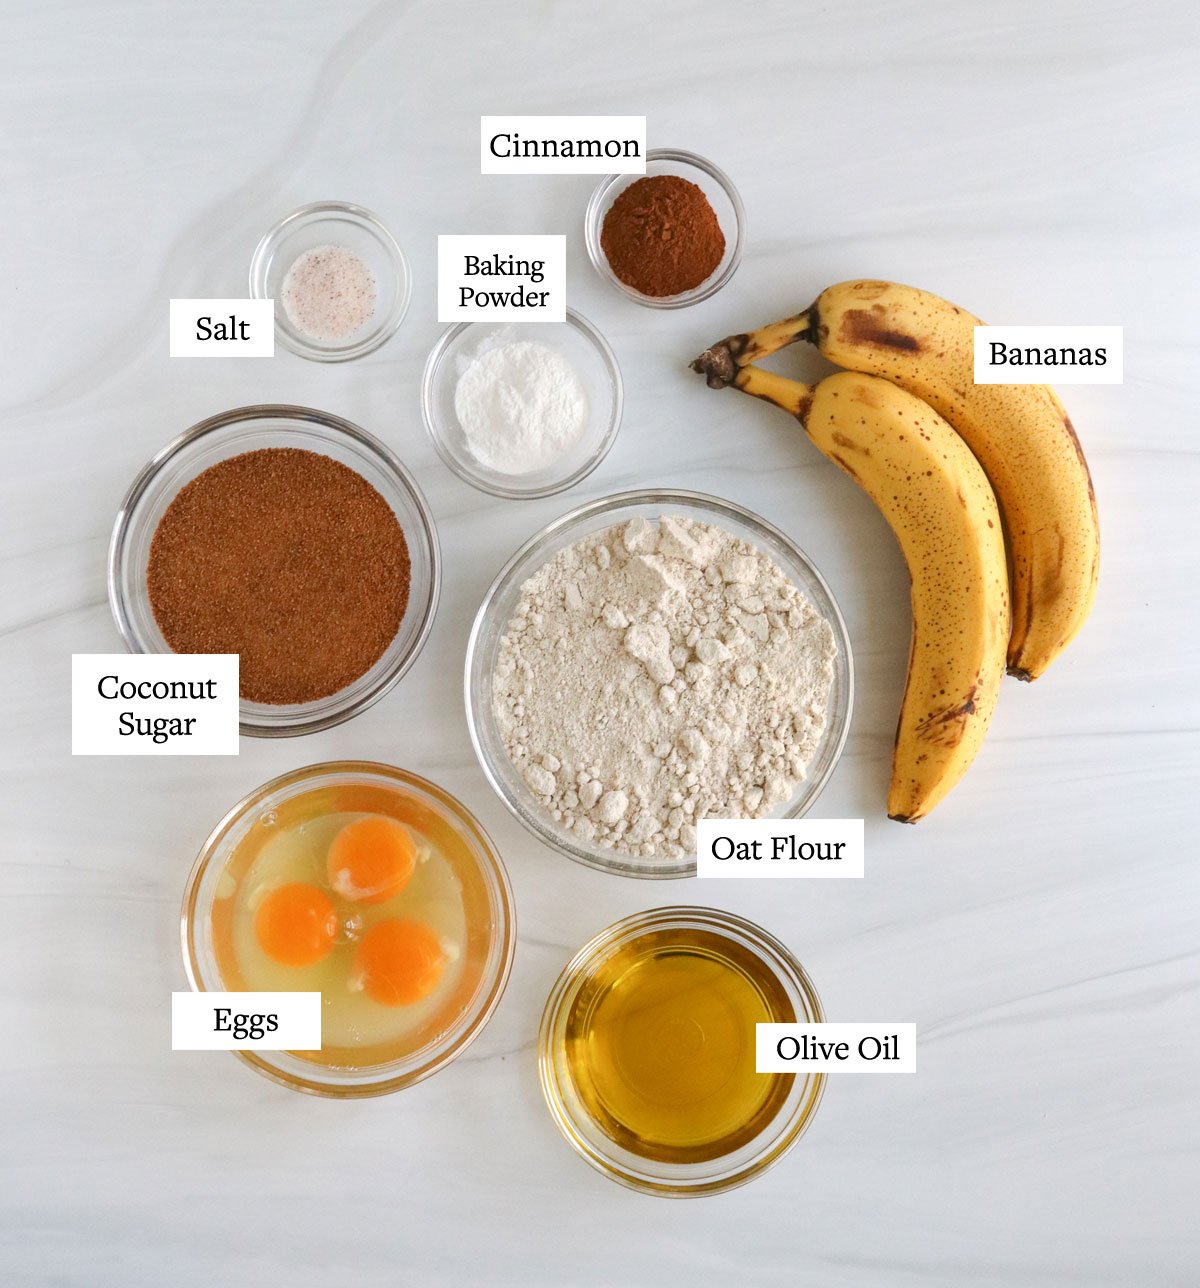 banana muffin ingredients on white surface.